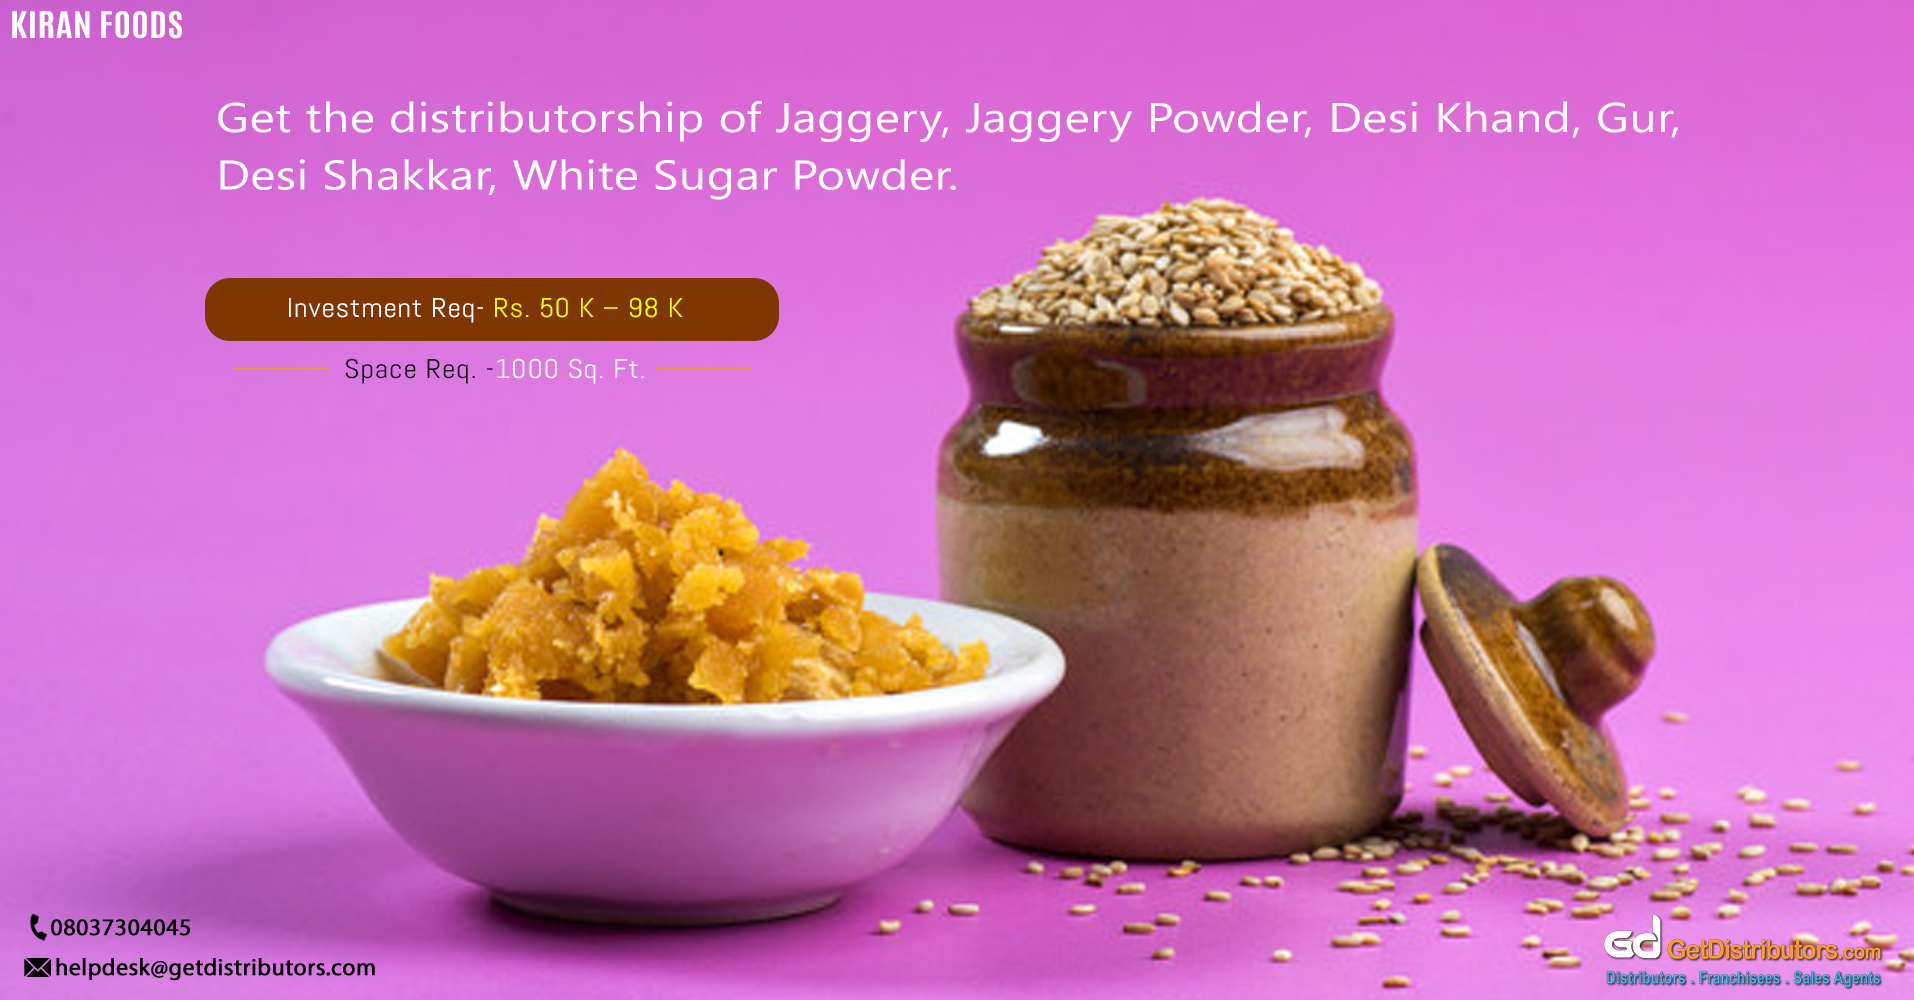 Take up the distributorship of certified quality jaggery and sugar